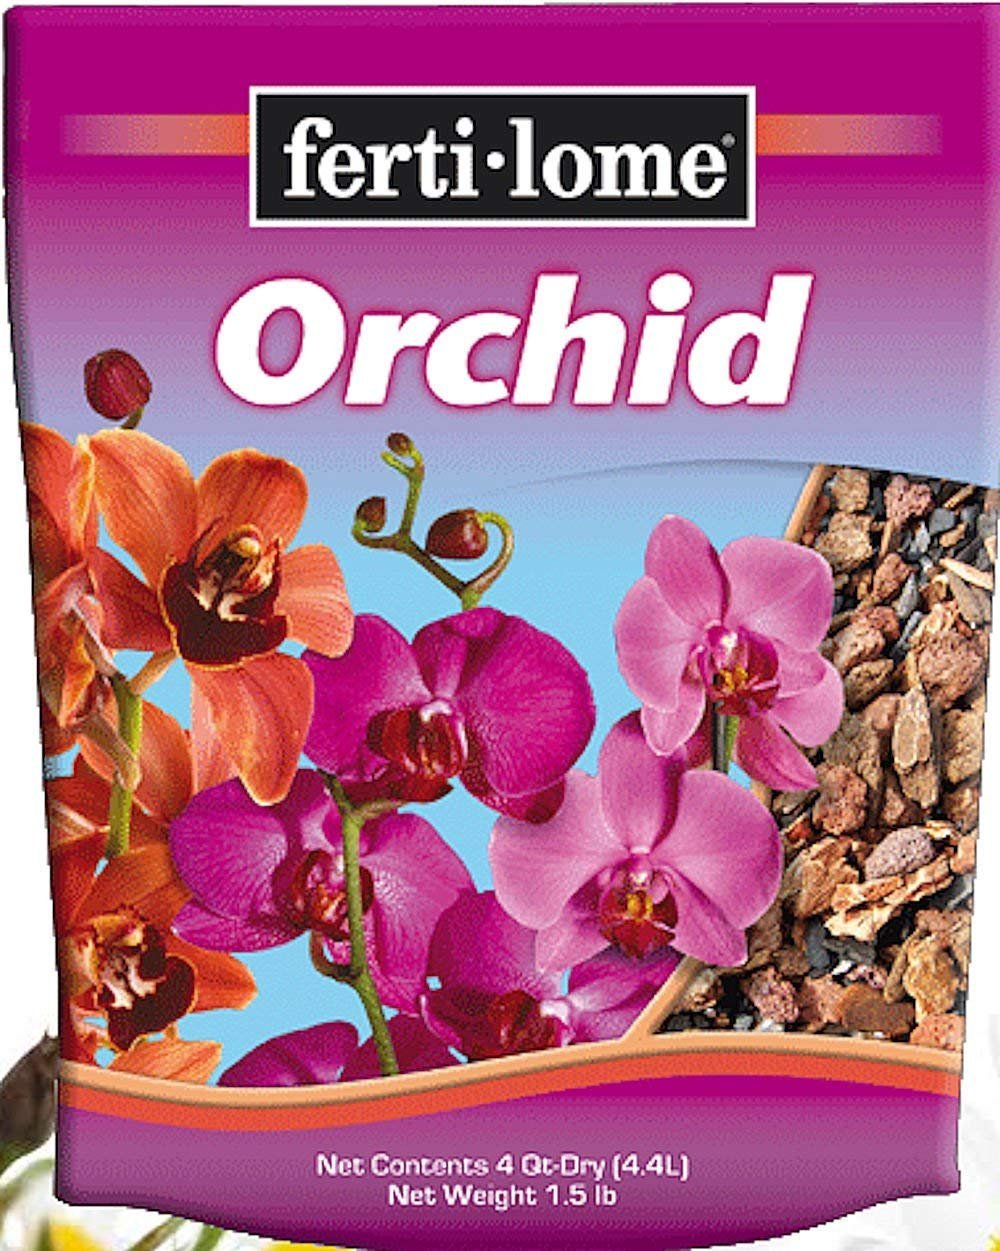 Orchid Mix